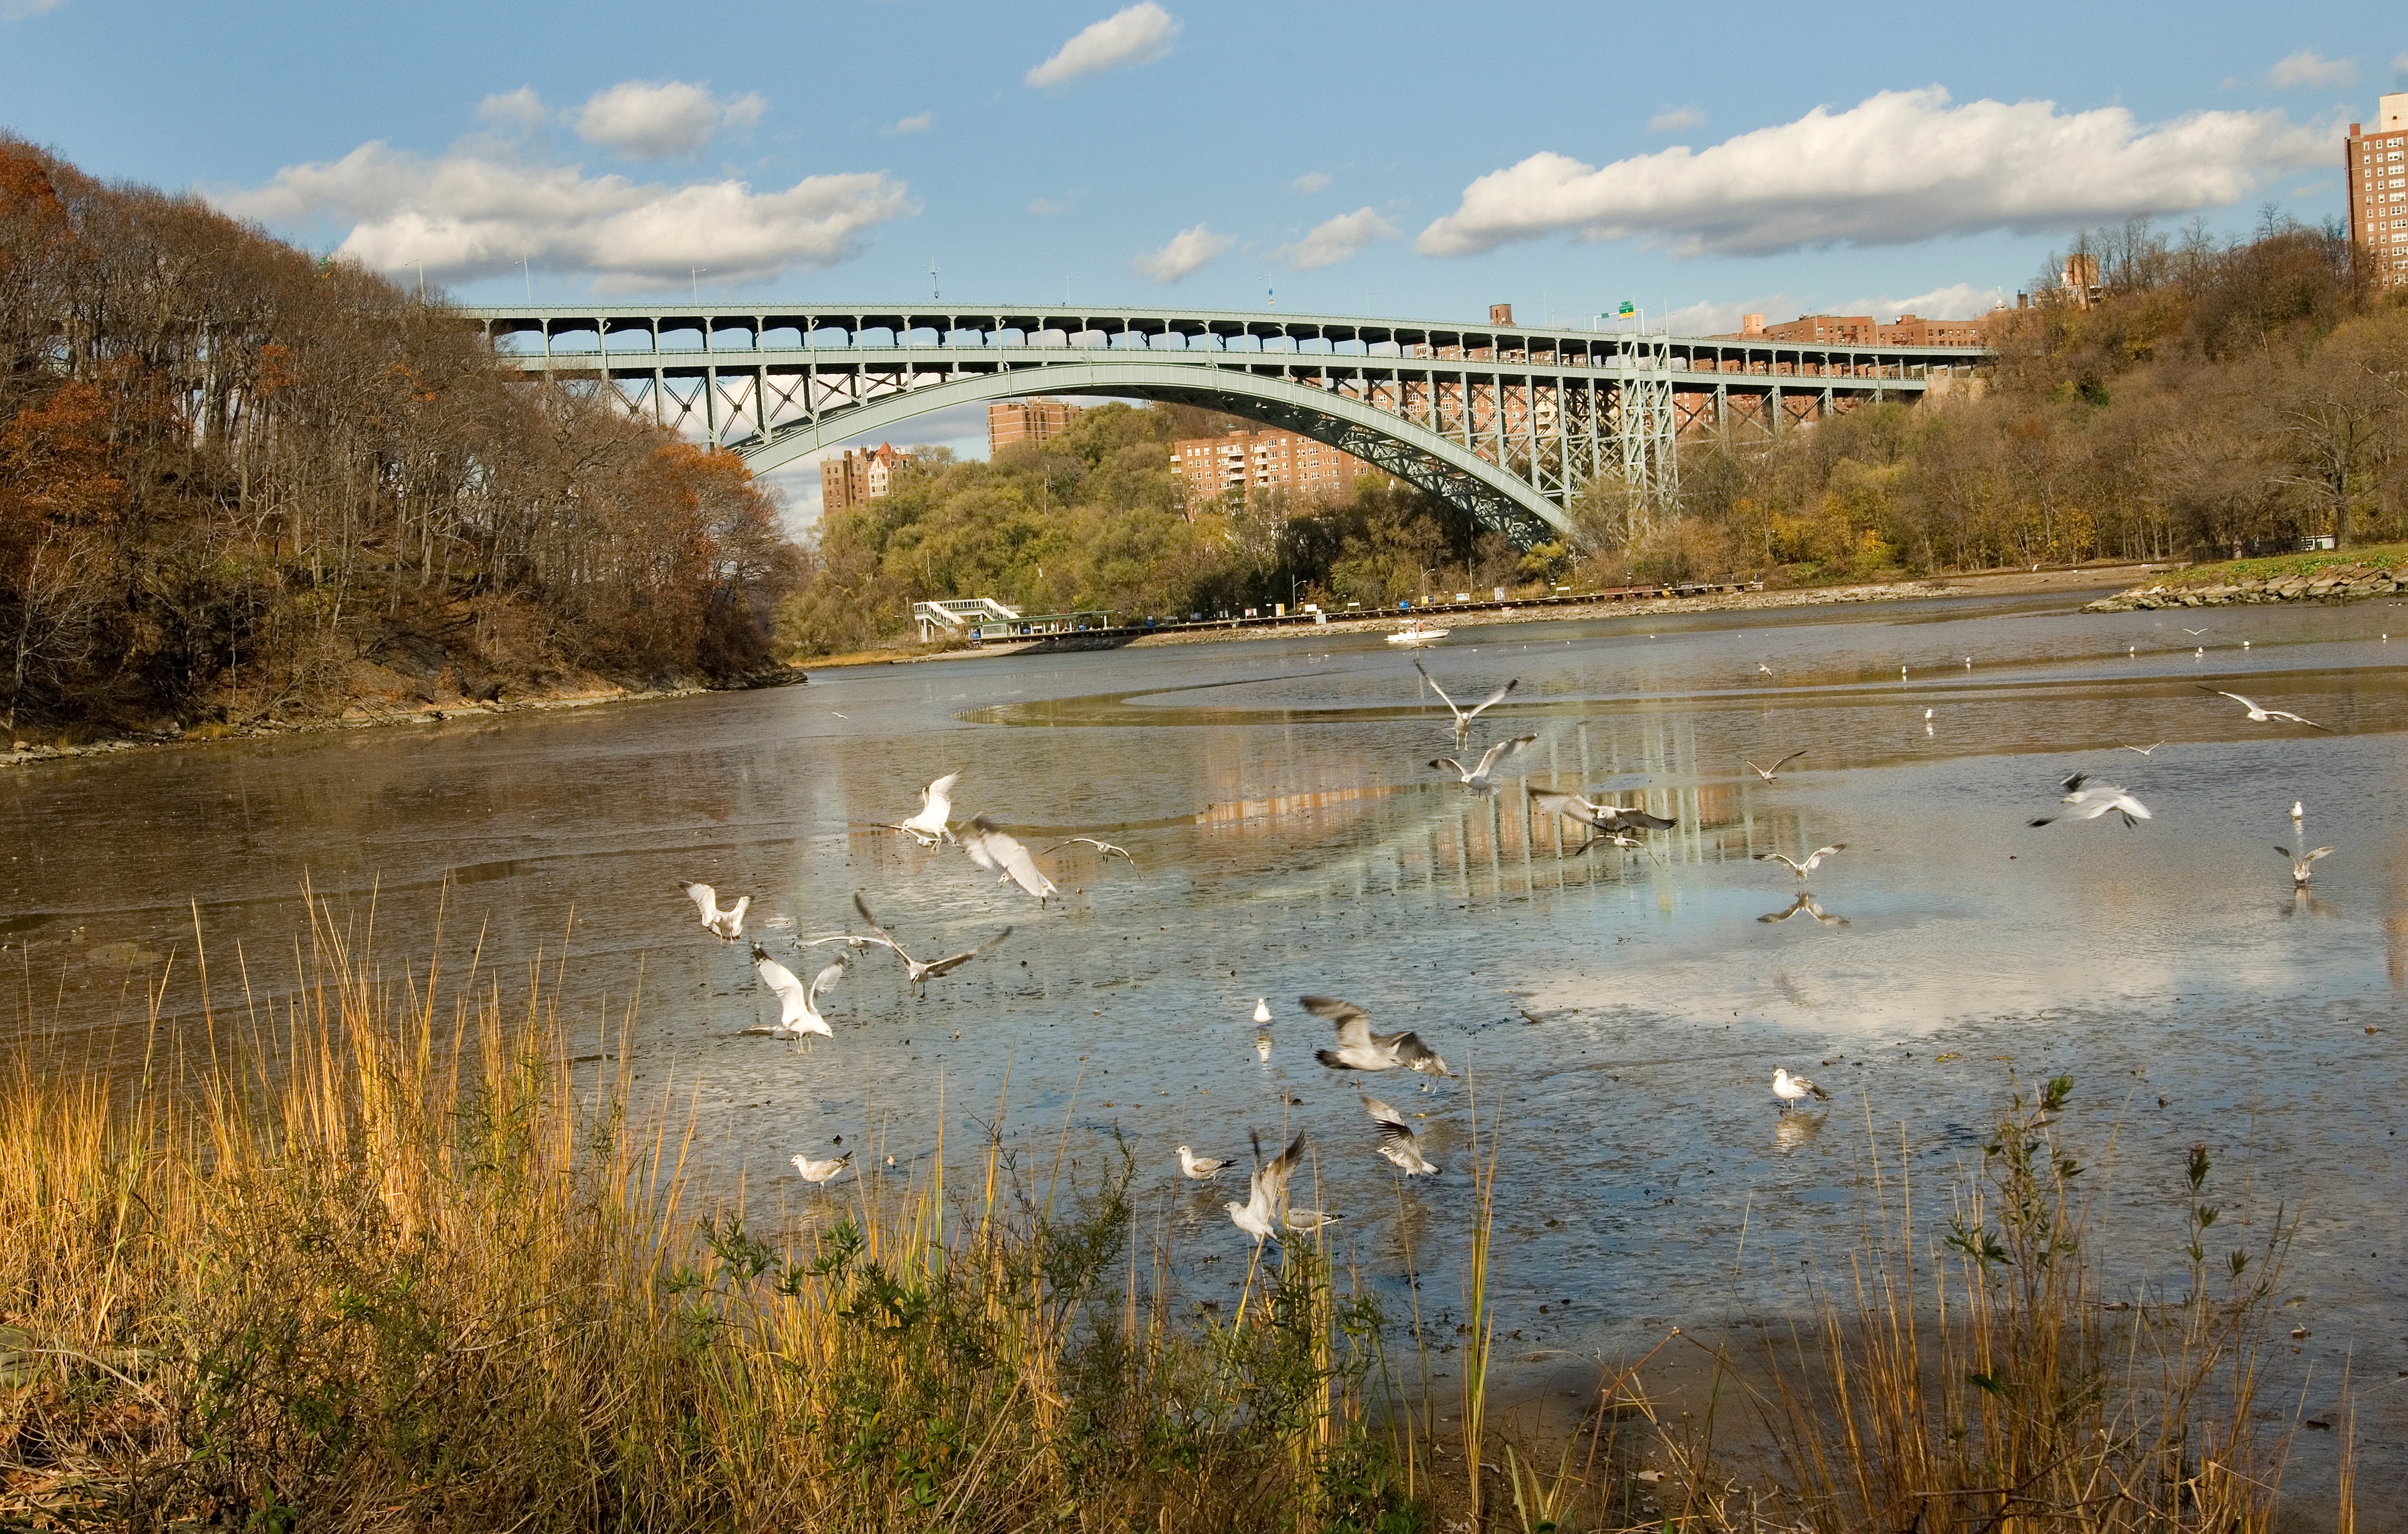 Birds flock along the water's edge with shrubbery in the foreground and the Henry Hudson bridge in the background.